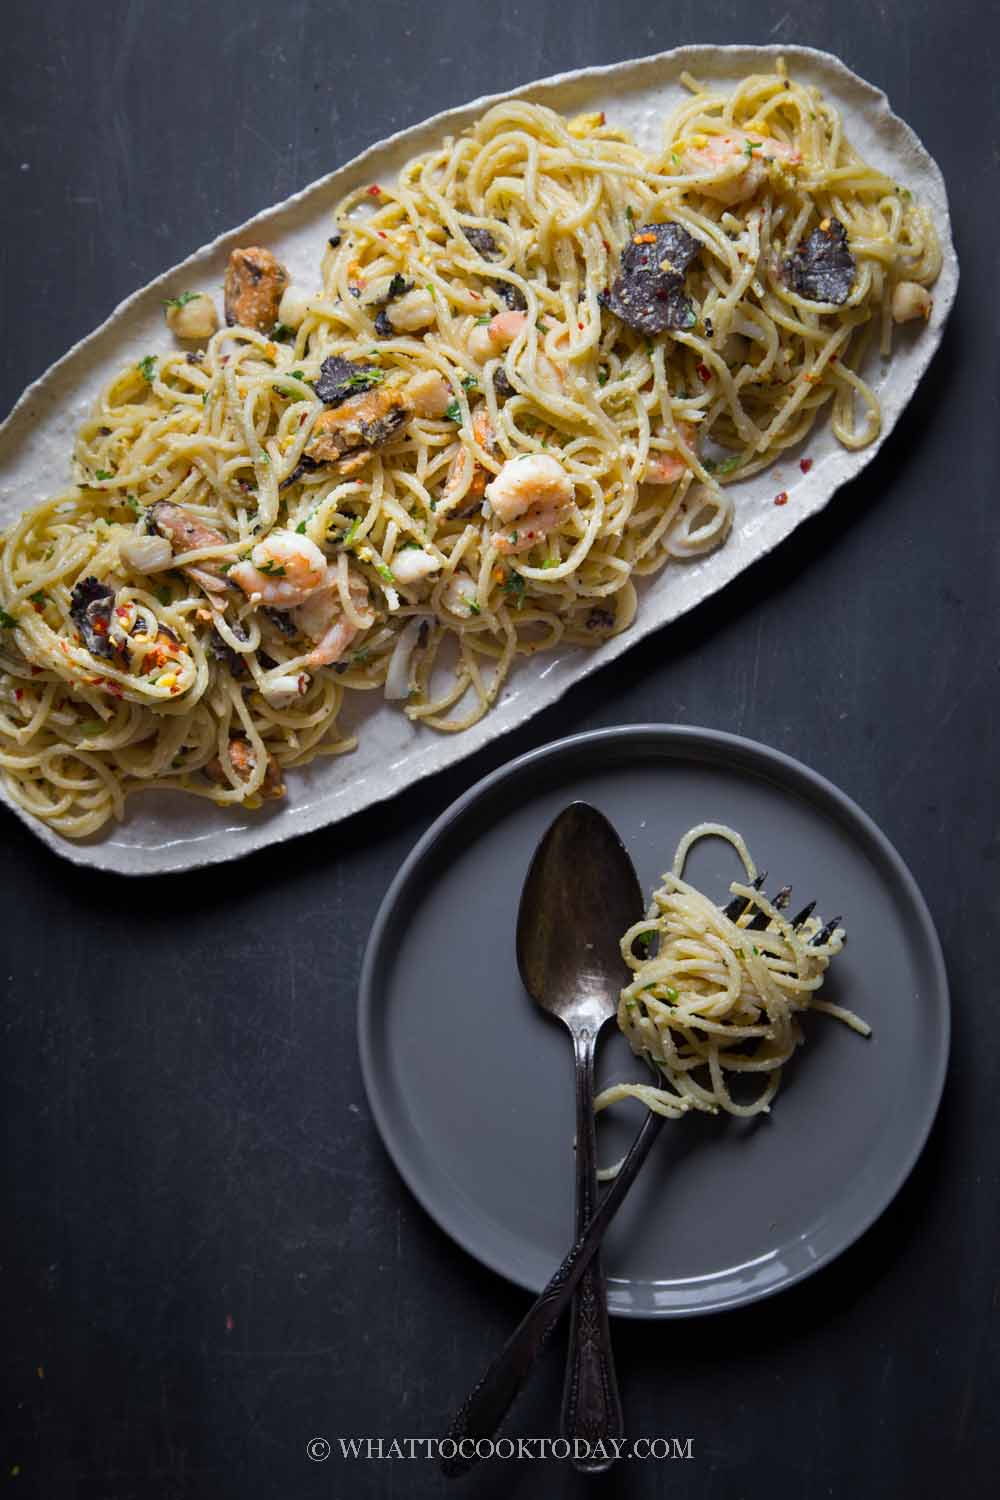 Salted Egg Yolk Seafood Pasta with Black Truffles